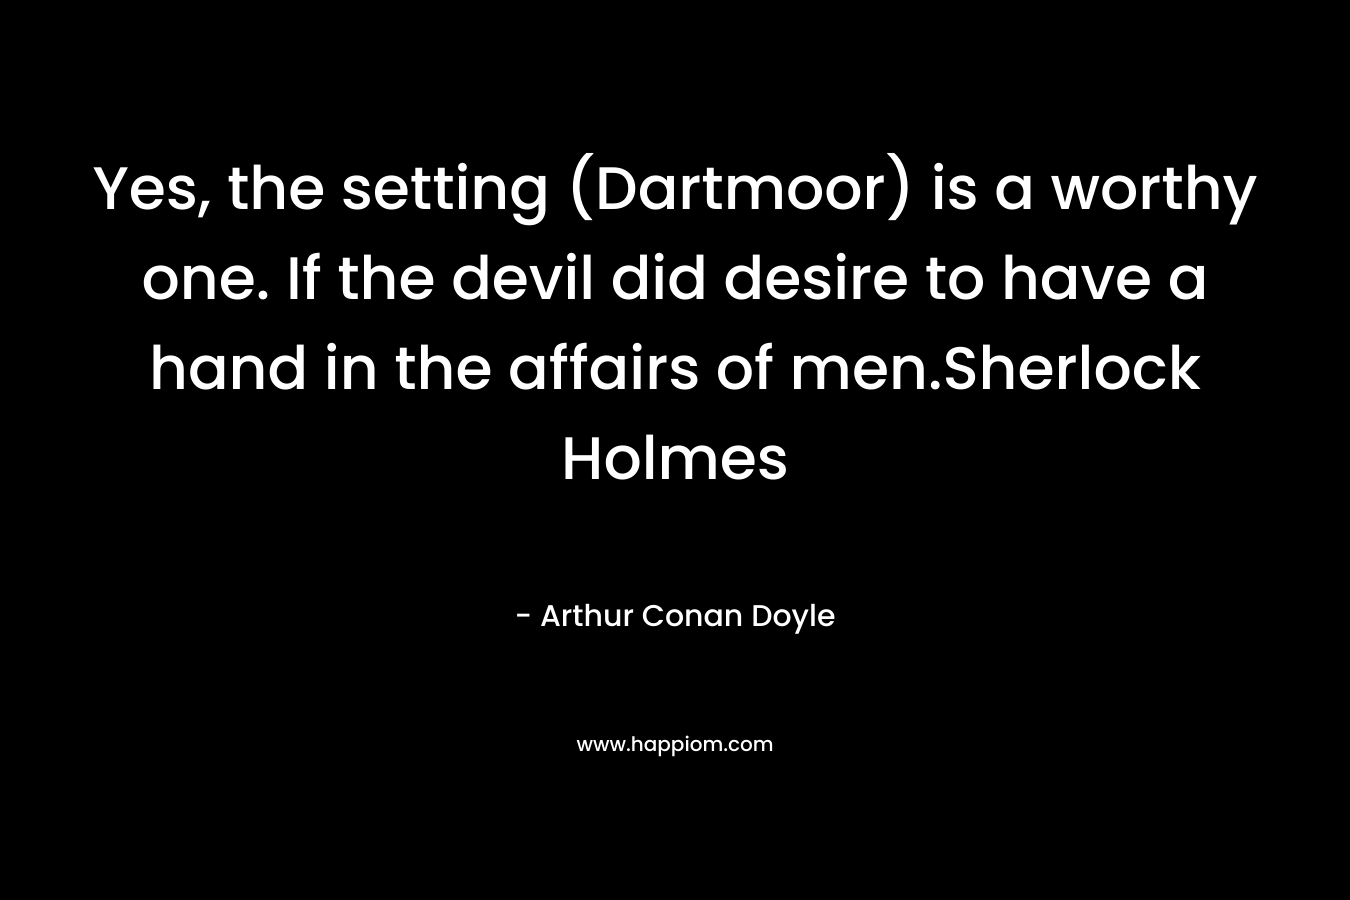 Yes, the setting (Dartmoor) is a worthy one. If the devil did desire to have a hand in the affairs of men.Sherlock Holmes – Arthur Conan Doyle